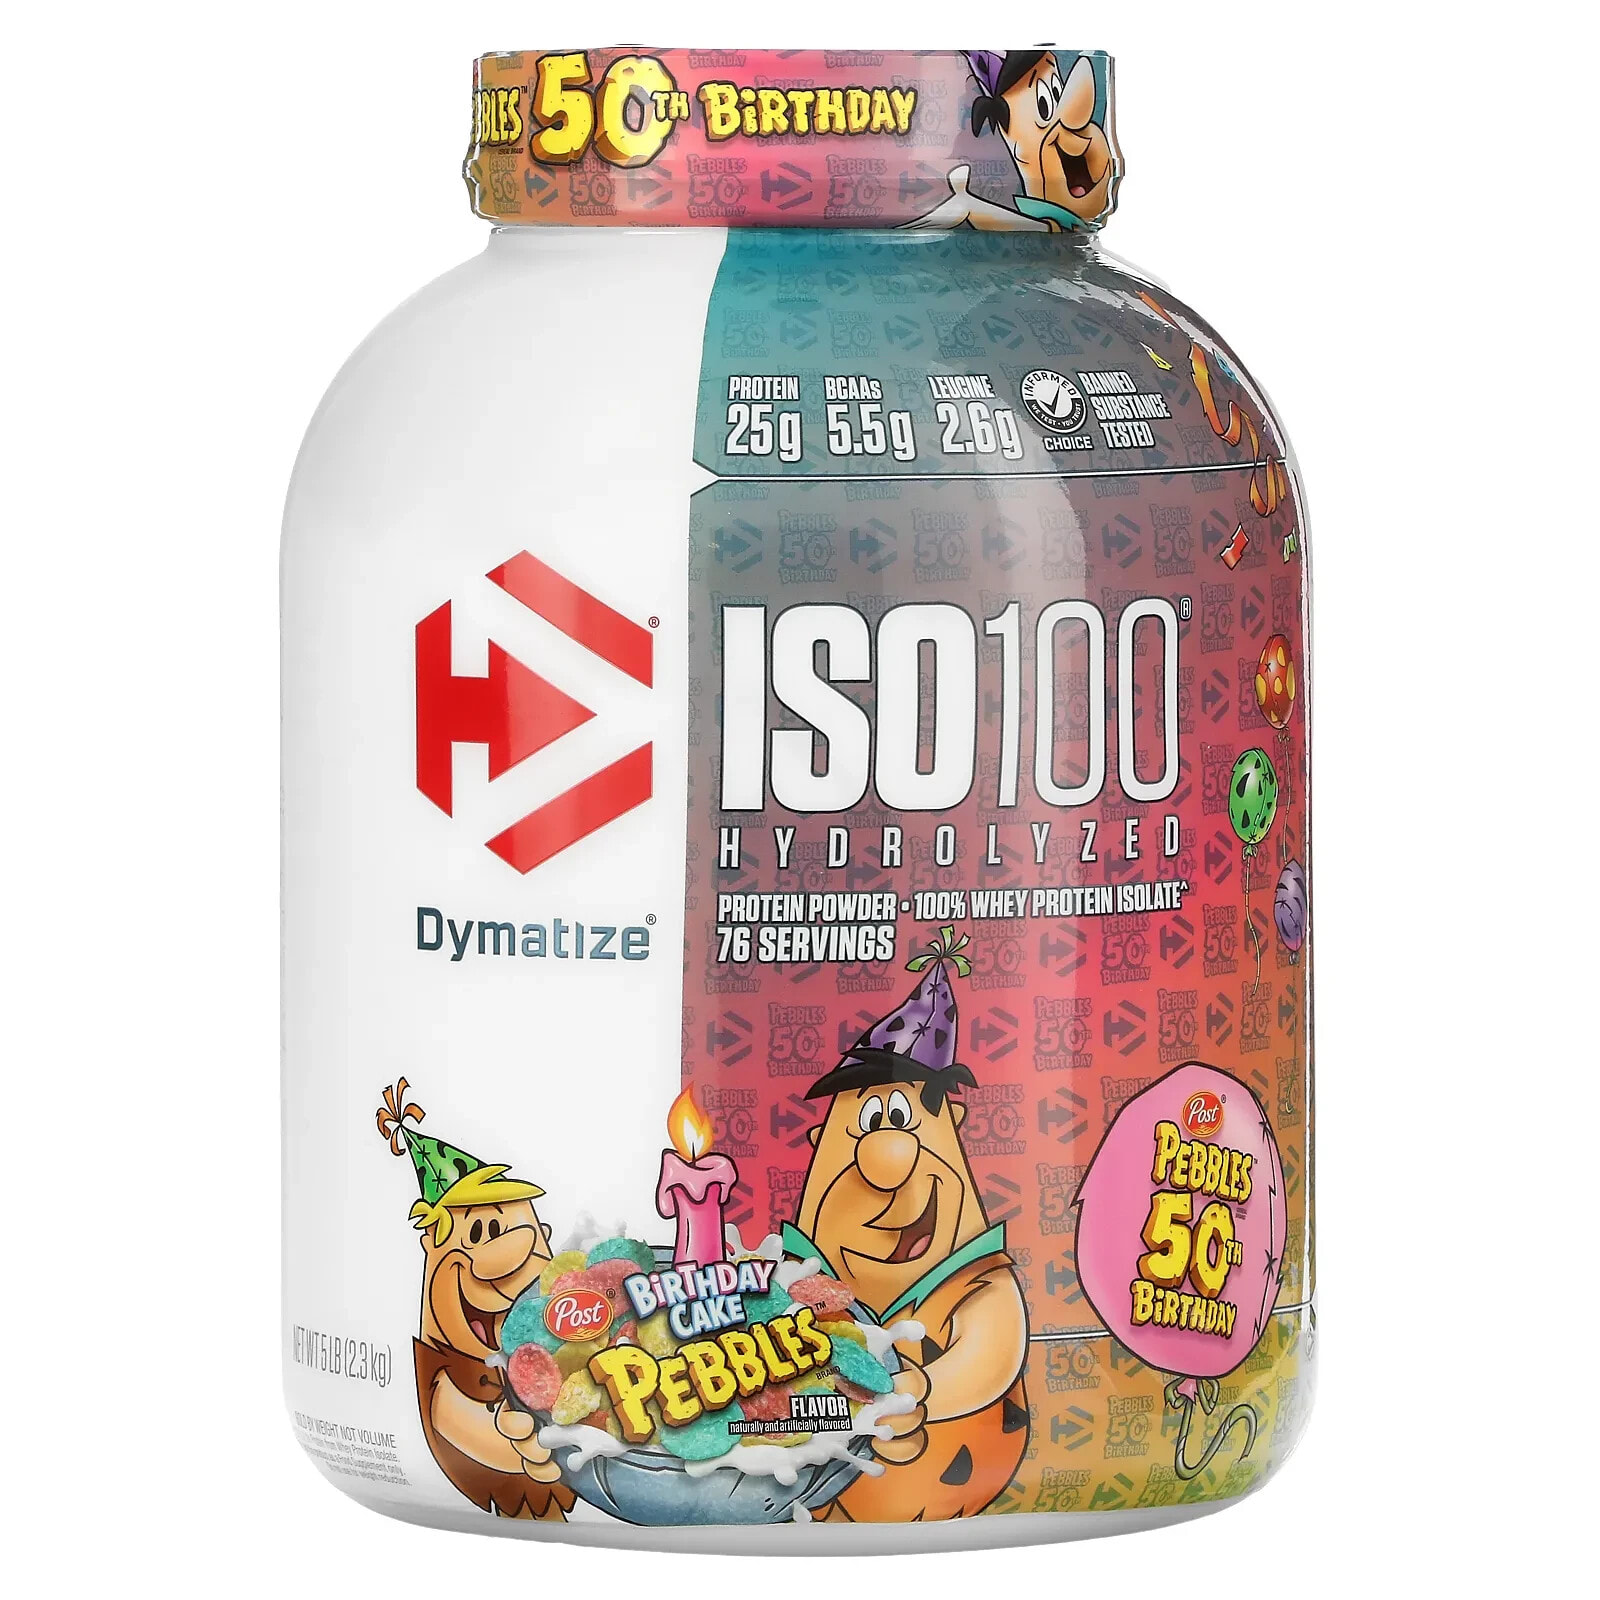 ISO100 Hydrolyzed, 100% Whey Protein Isolate, Gourmet Chocolate, 3 lb (1.4 kg)